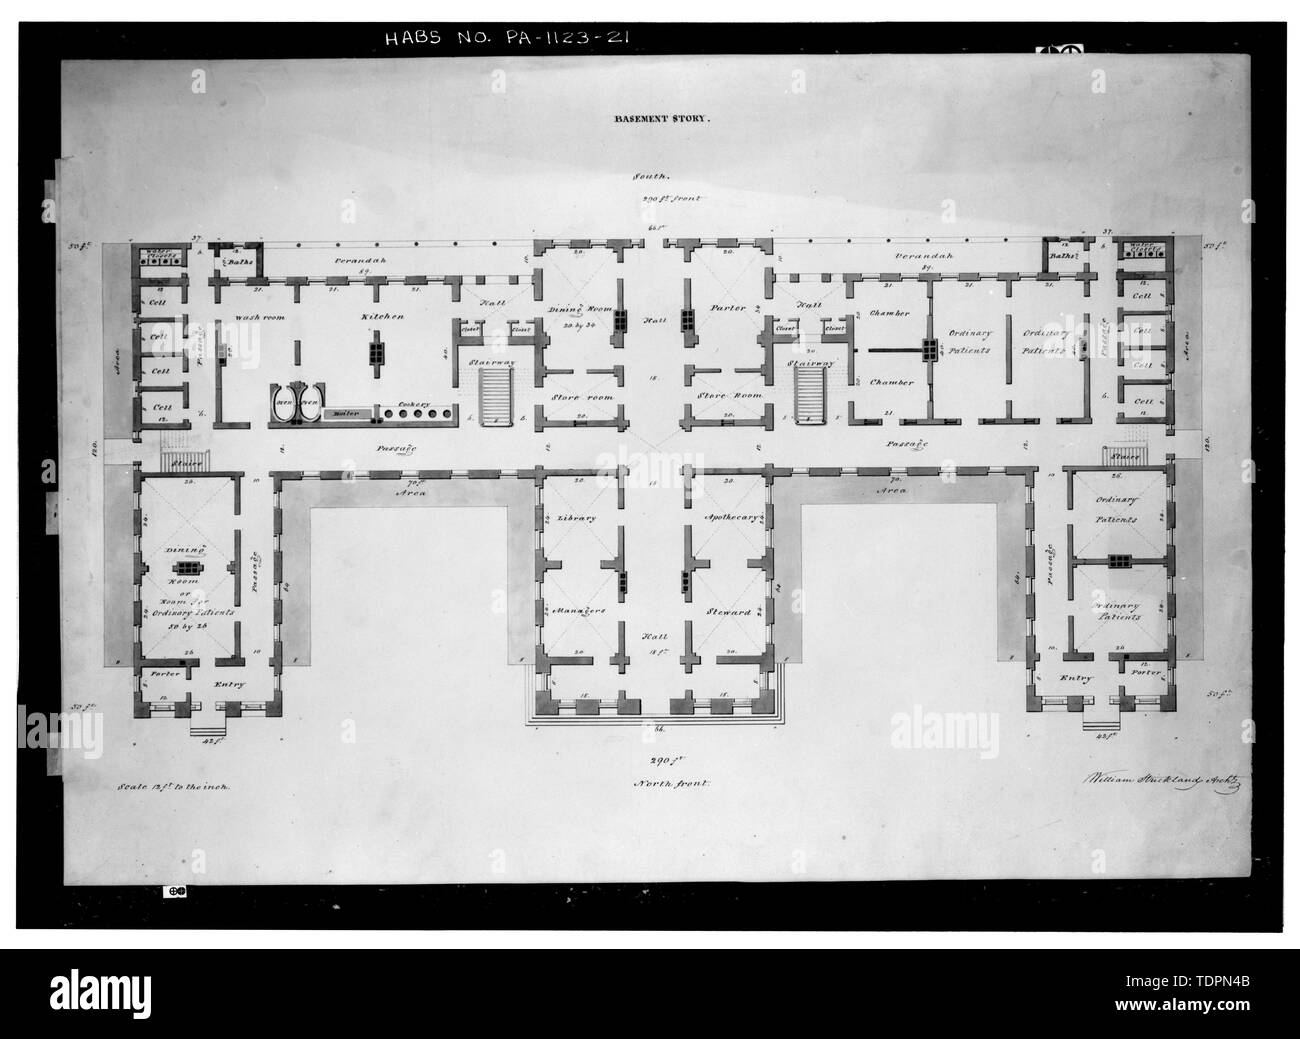 Photograph of architectural competition drawing; original in the possession of the Pennsylvania Hospital. William Strickland, architect, (circa December 1833). BASEMENT STORY - Pennsylvania Hospital, Eighth and Ninth, Pine and Spruce Streets, Philadelphia, Philadelphia County, PA Stock Photo